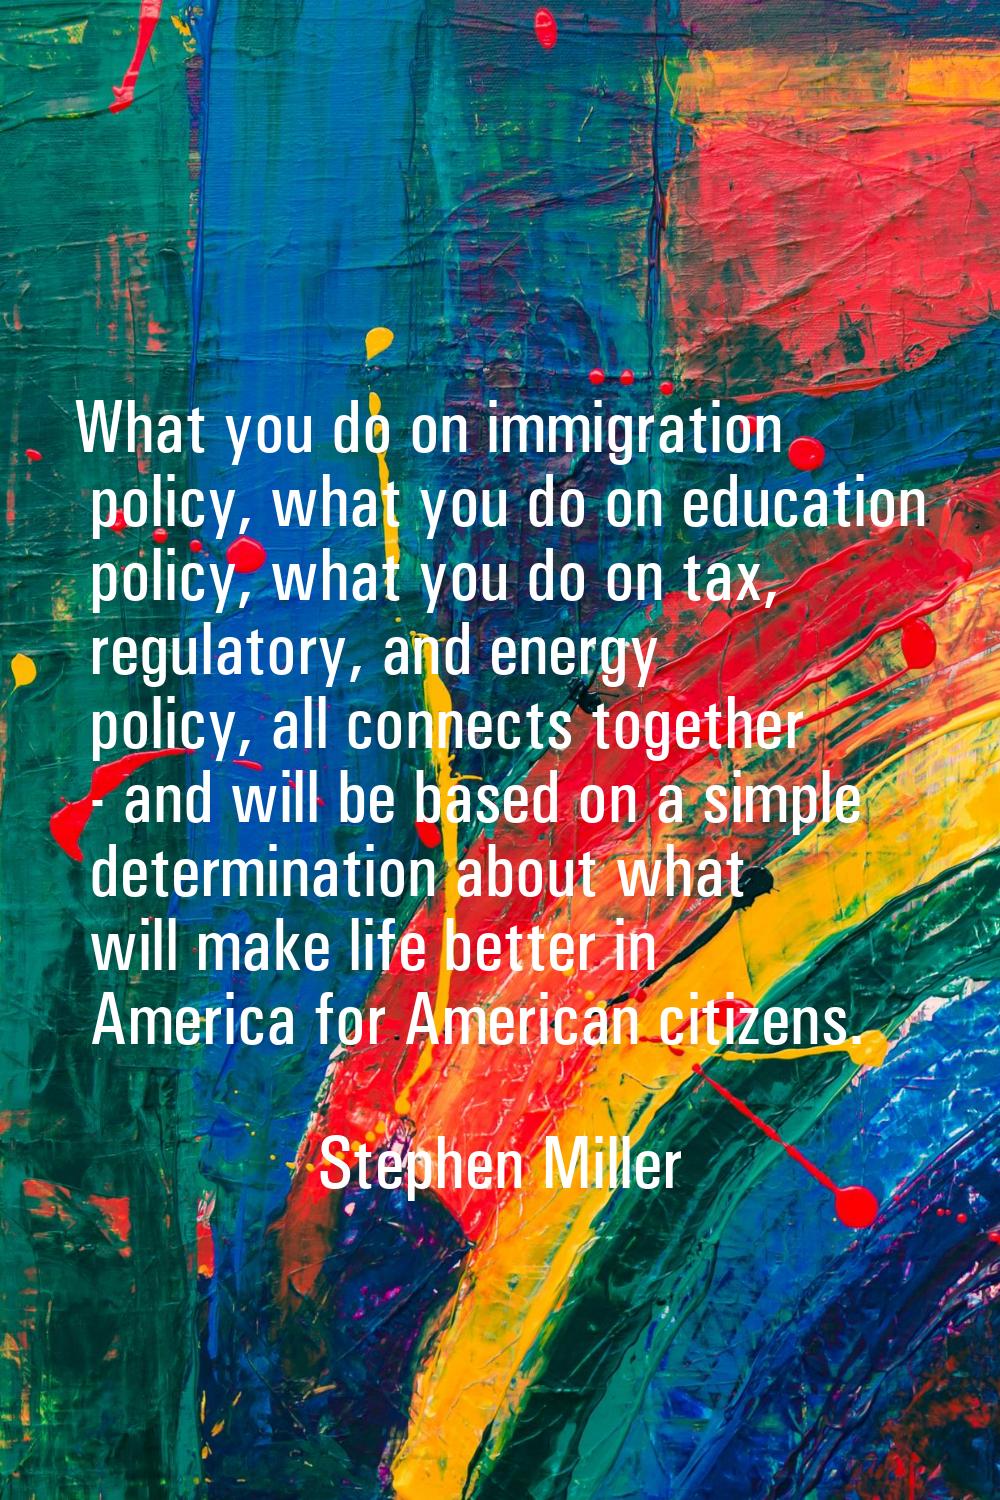 What you do on immigration policy, what you do on education policy, what you do on tax, regulatory,